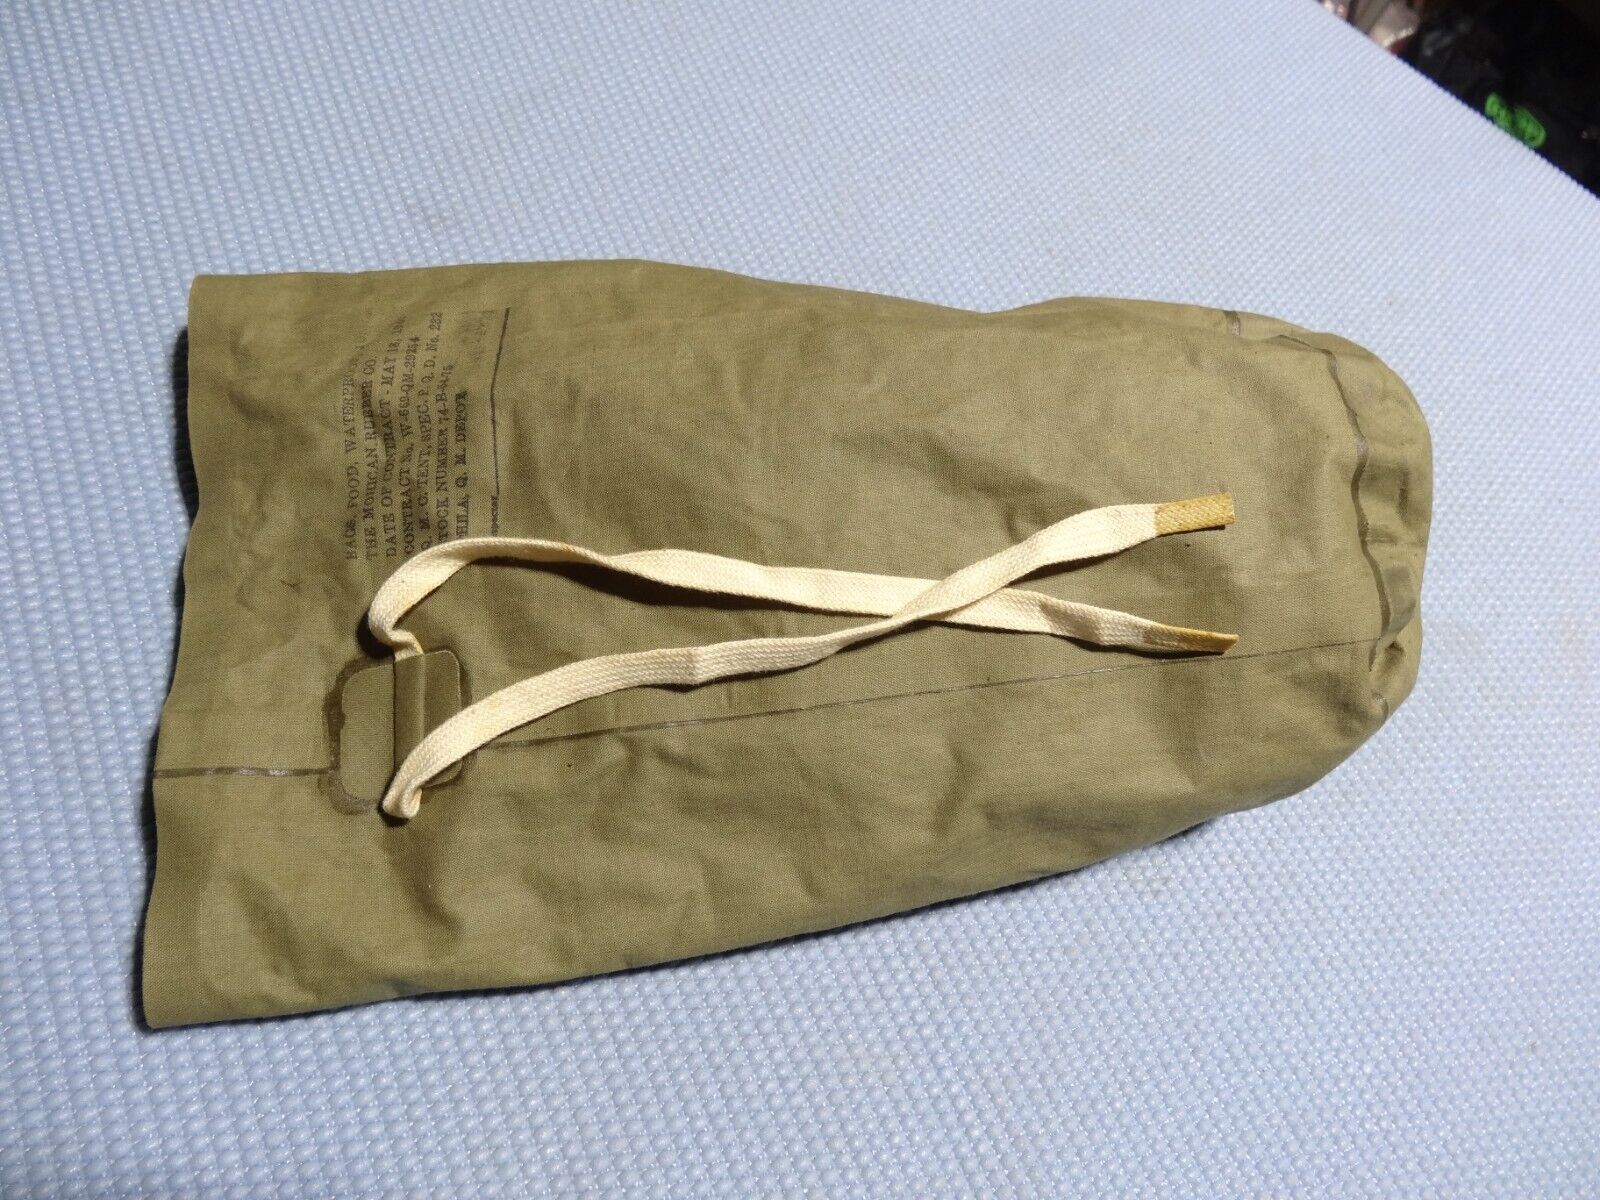 UNISSUED  WWII U.S. Army Small Waterproof Rubber Bag Fabric Dated 1943  MOHICAN